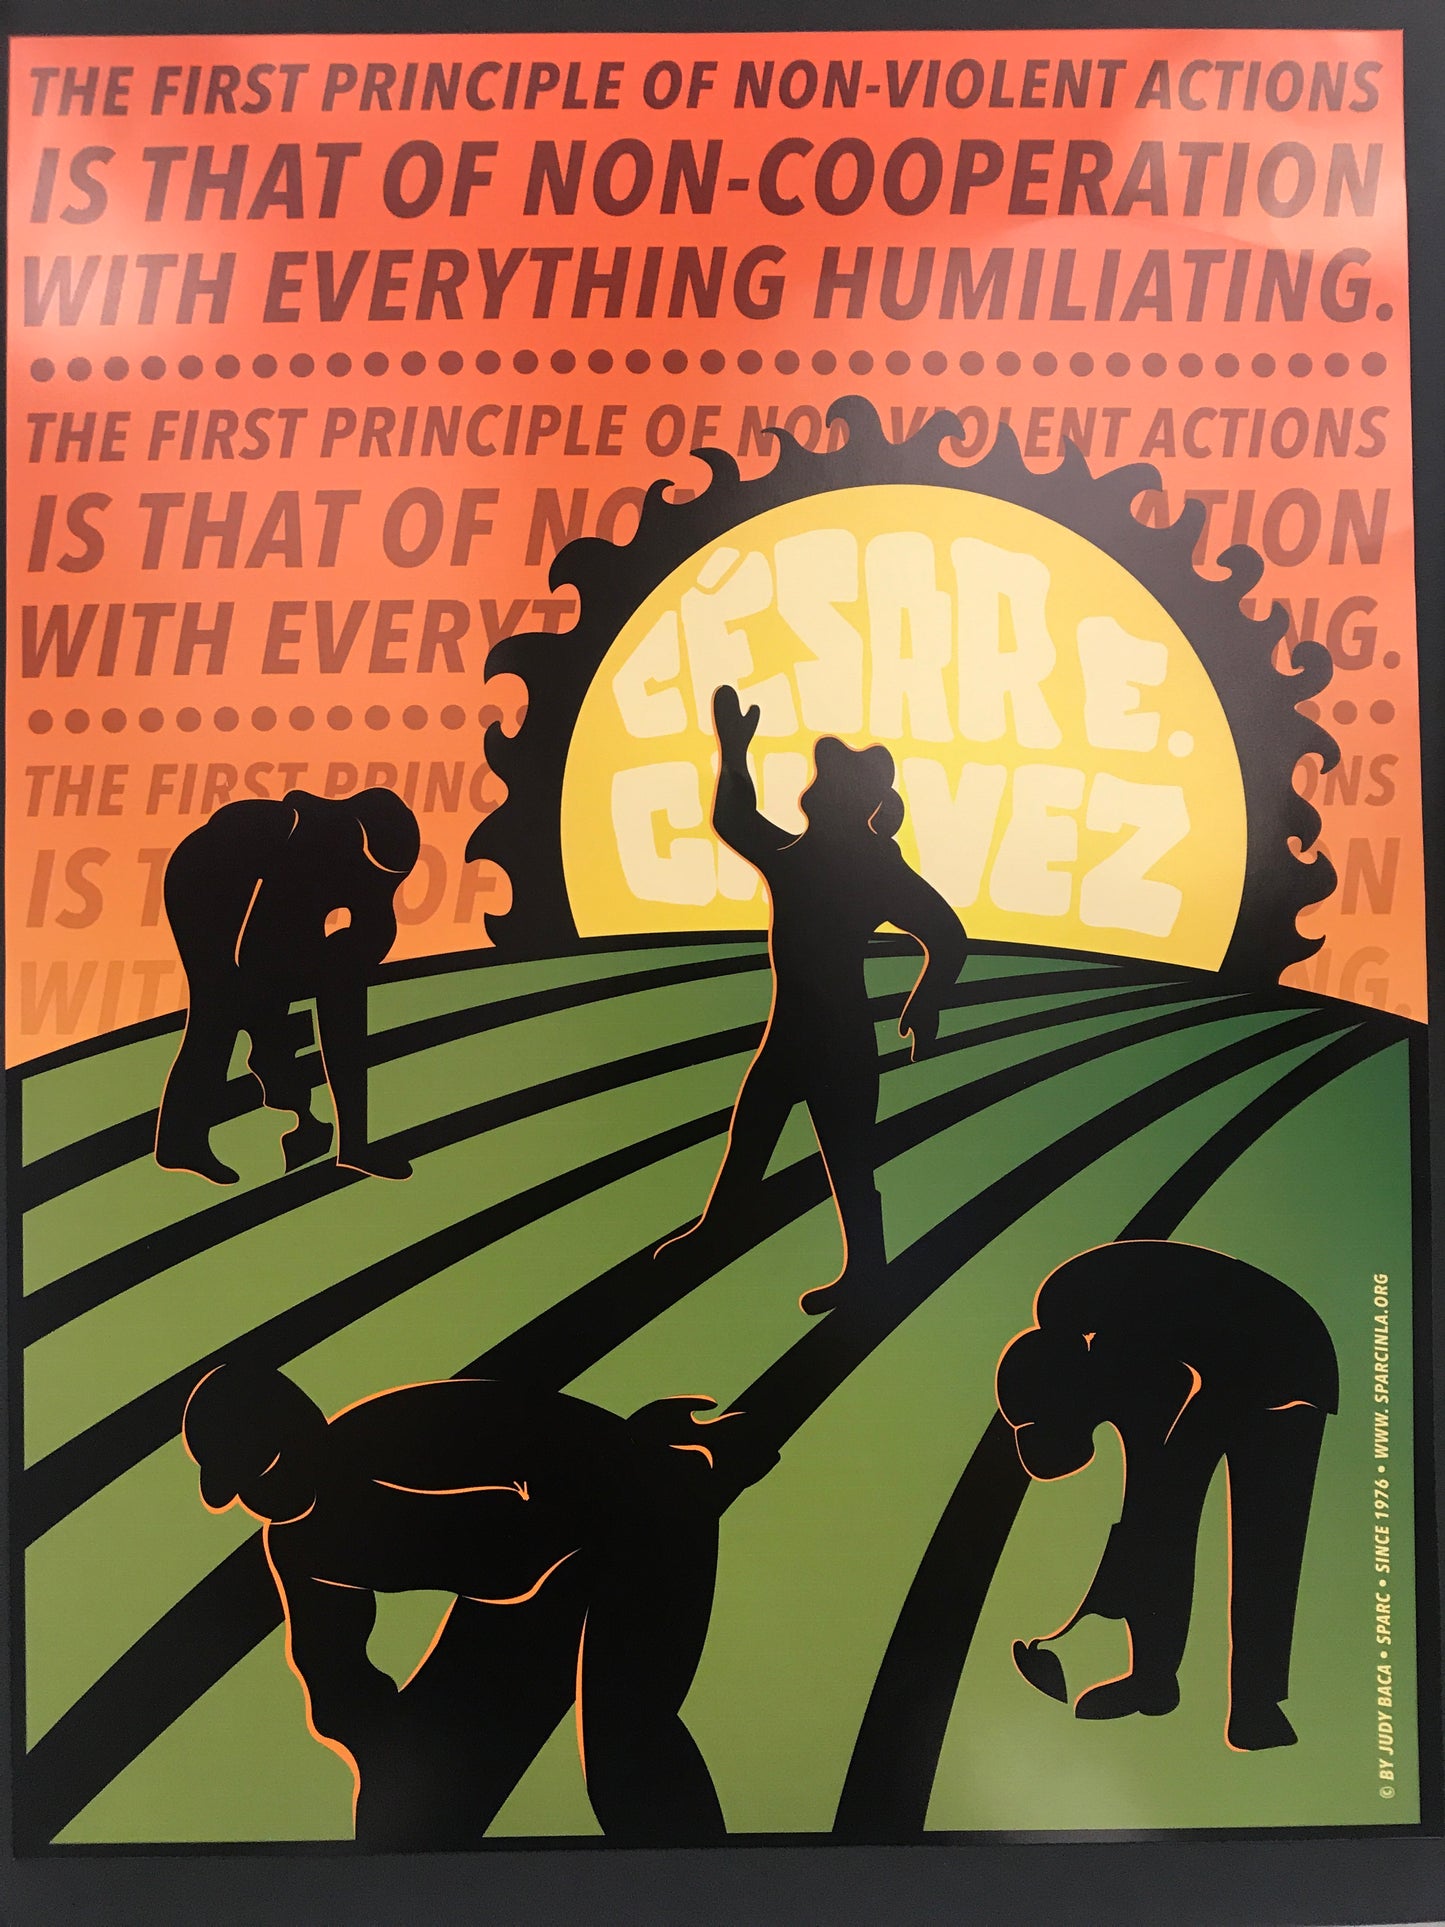 There is No Such Thing as Defeat in Nonviolence Poster -Judy Baca